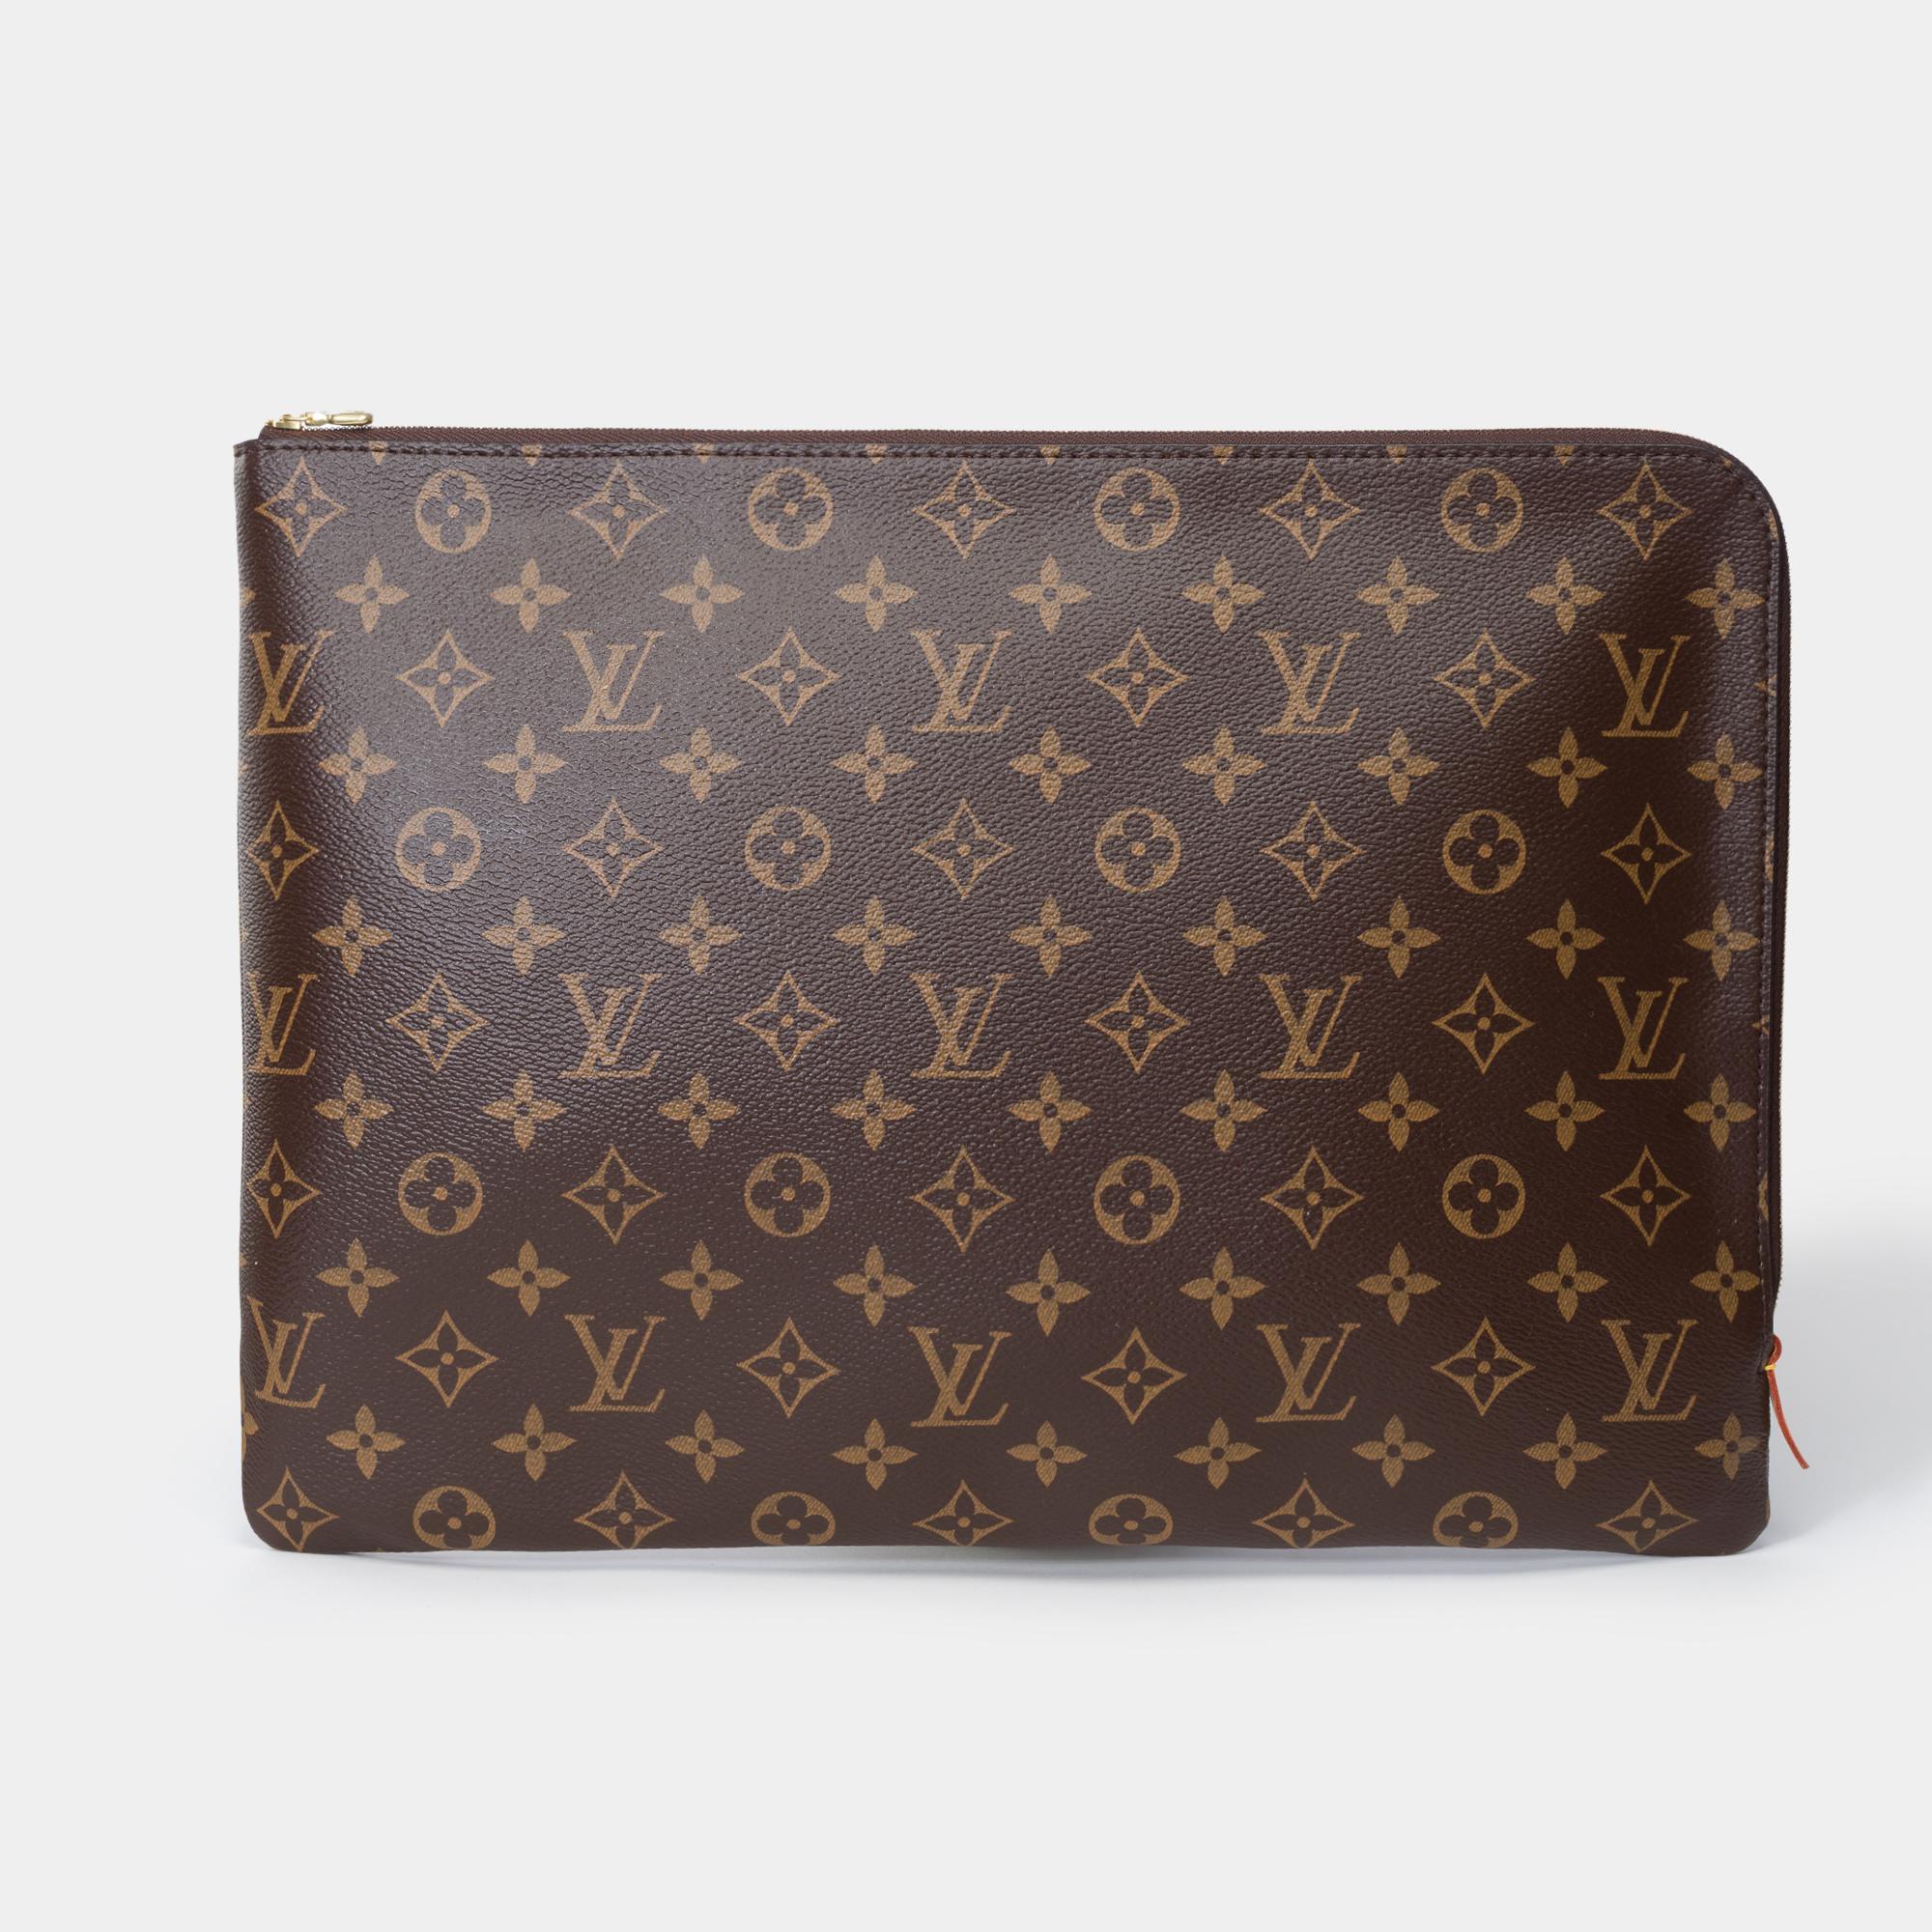 Amazing​ ​Louis​ ​Vuitton​ ​Travel​ ​Briefcase​ ​in​ ​brown​ ​monogram​ ​canvas,​ ​gold​ ​metal​ ​trim,​ ​hand​ ​carry

A​ ​zipper
Inner​ ​lining​ ​in​ ​brown​ ​leather
Signature:​ ​